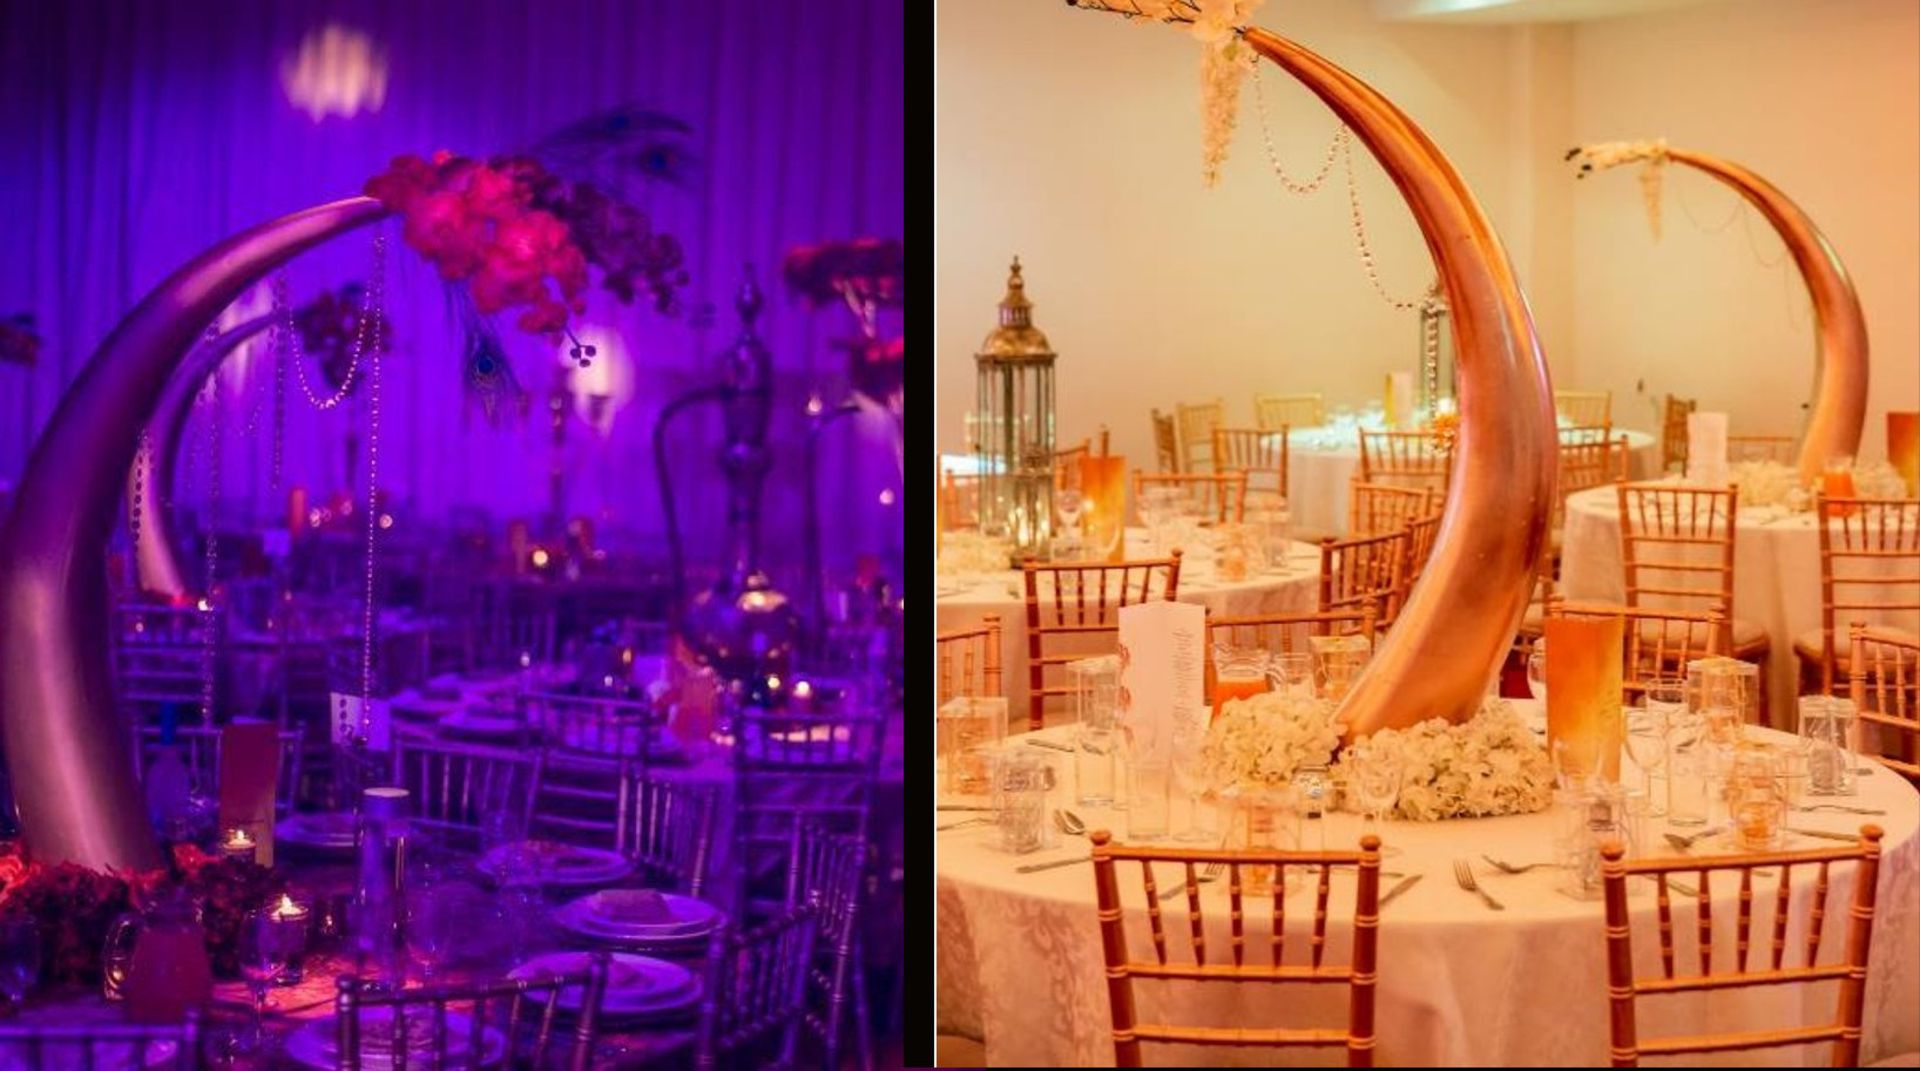 4 x Tusk Shaped 1.2 Metre Tall Fibre Glass Table Centre Pieces In Gold